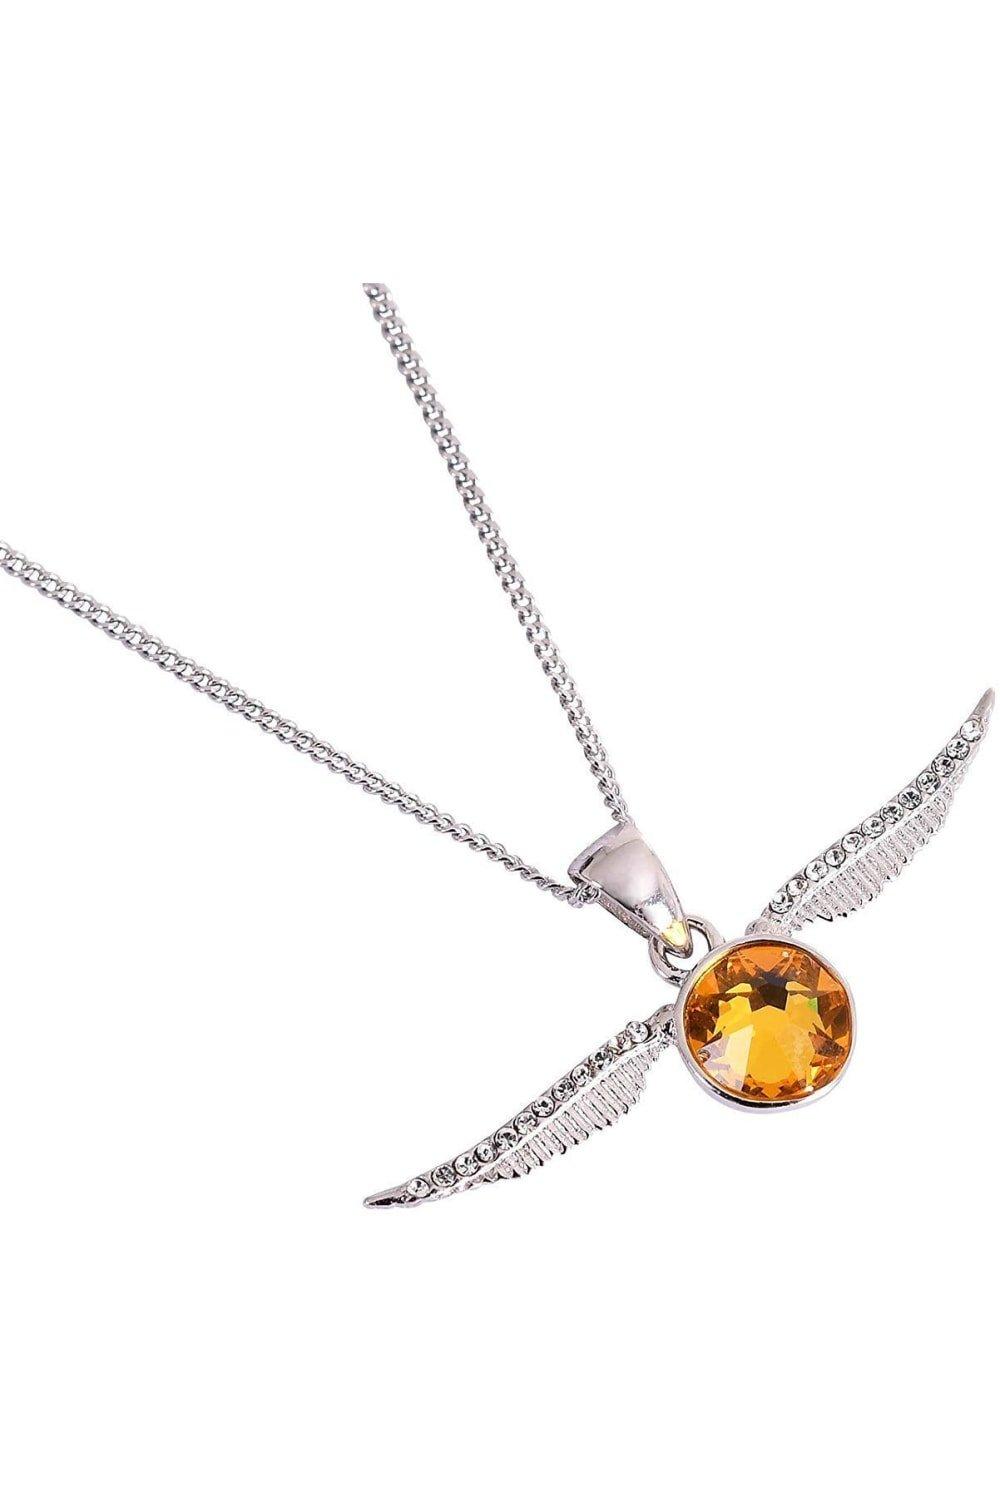 Jewelled Golden Snitch Necklace